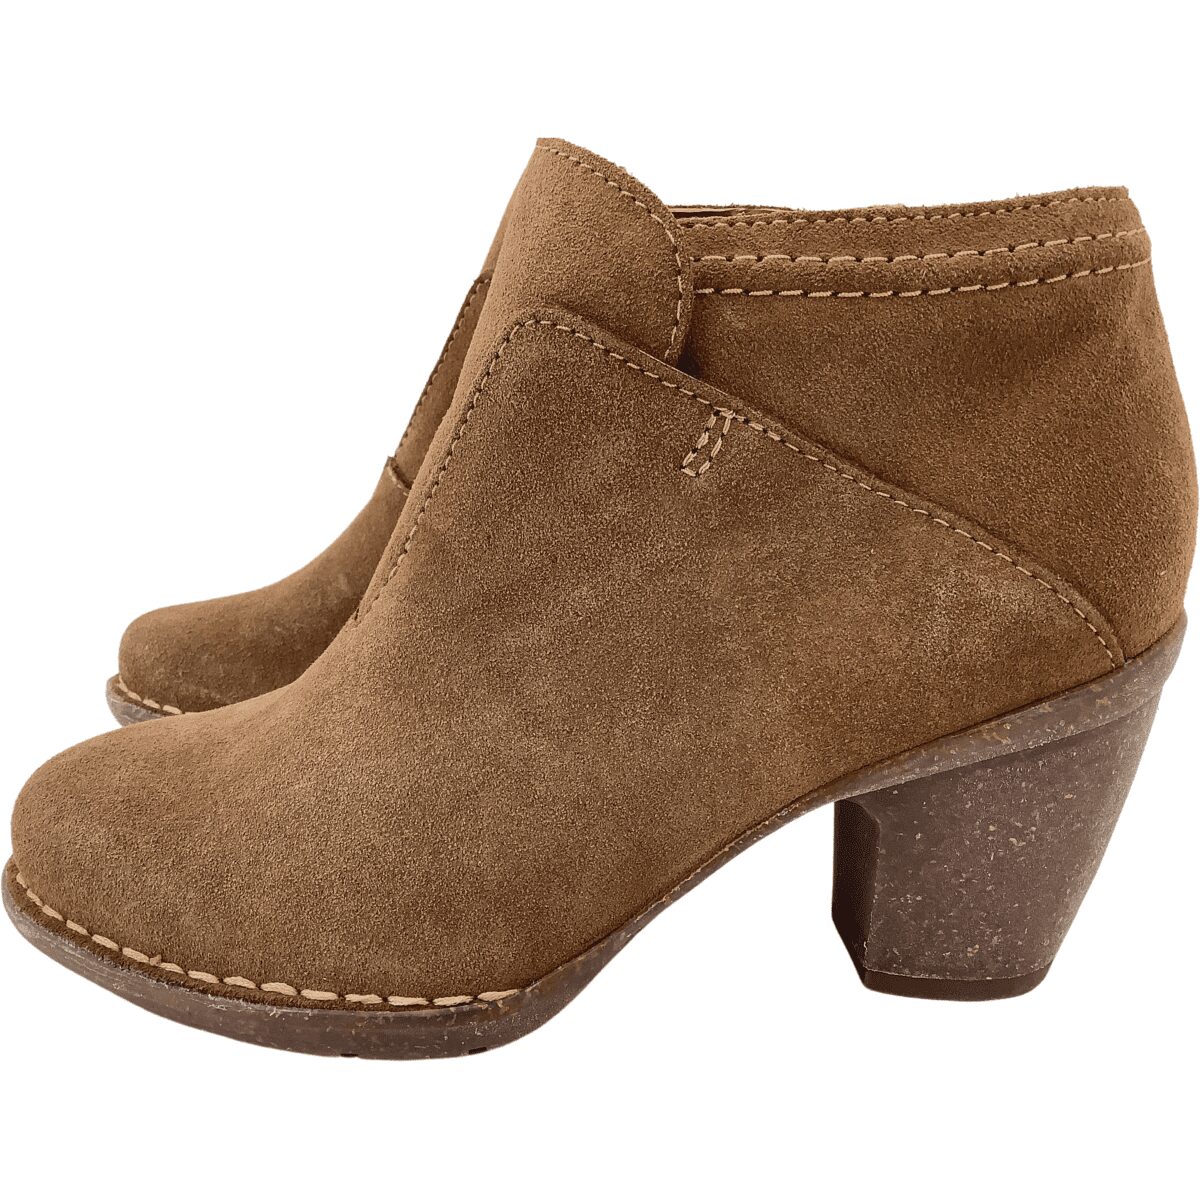 Clarks Heeled Boots4